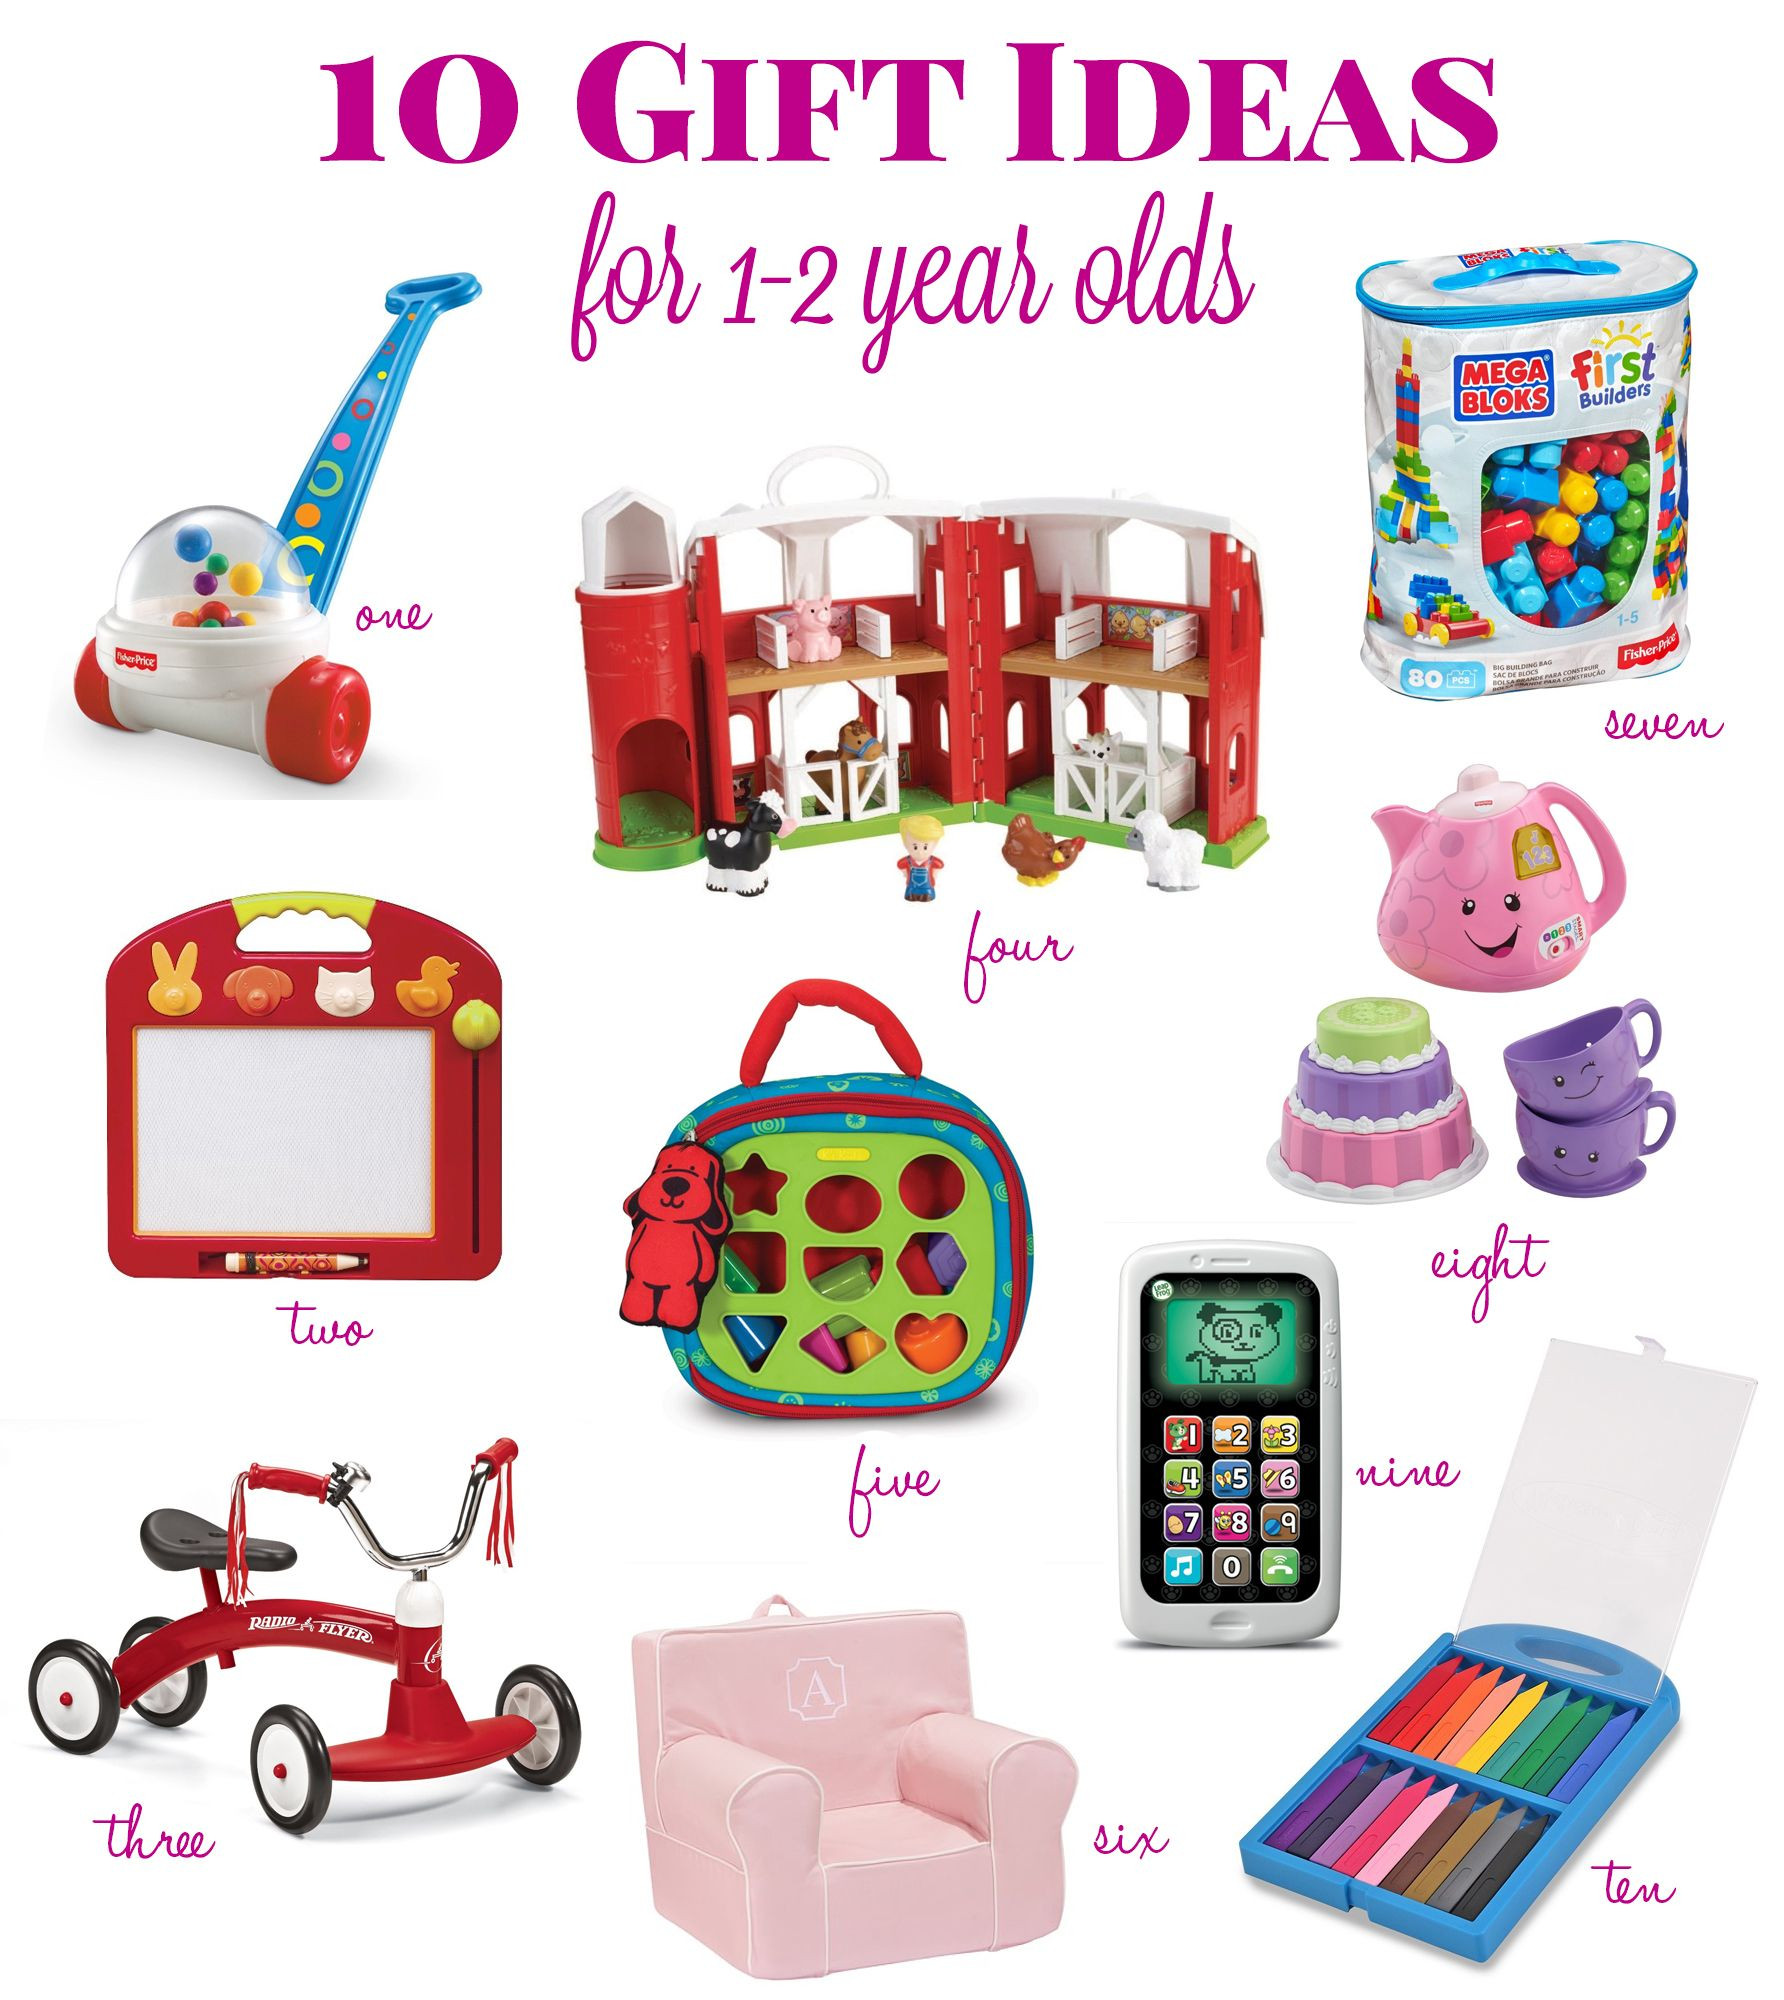 2Nd Birthday Boy Gift Ideas
 Gift Ideas for a 1 Year Old